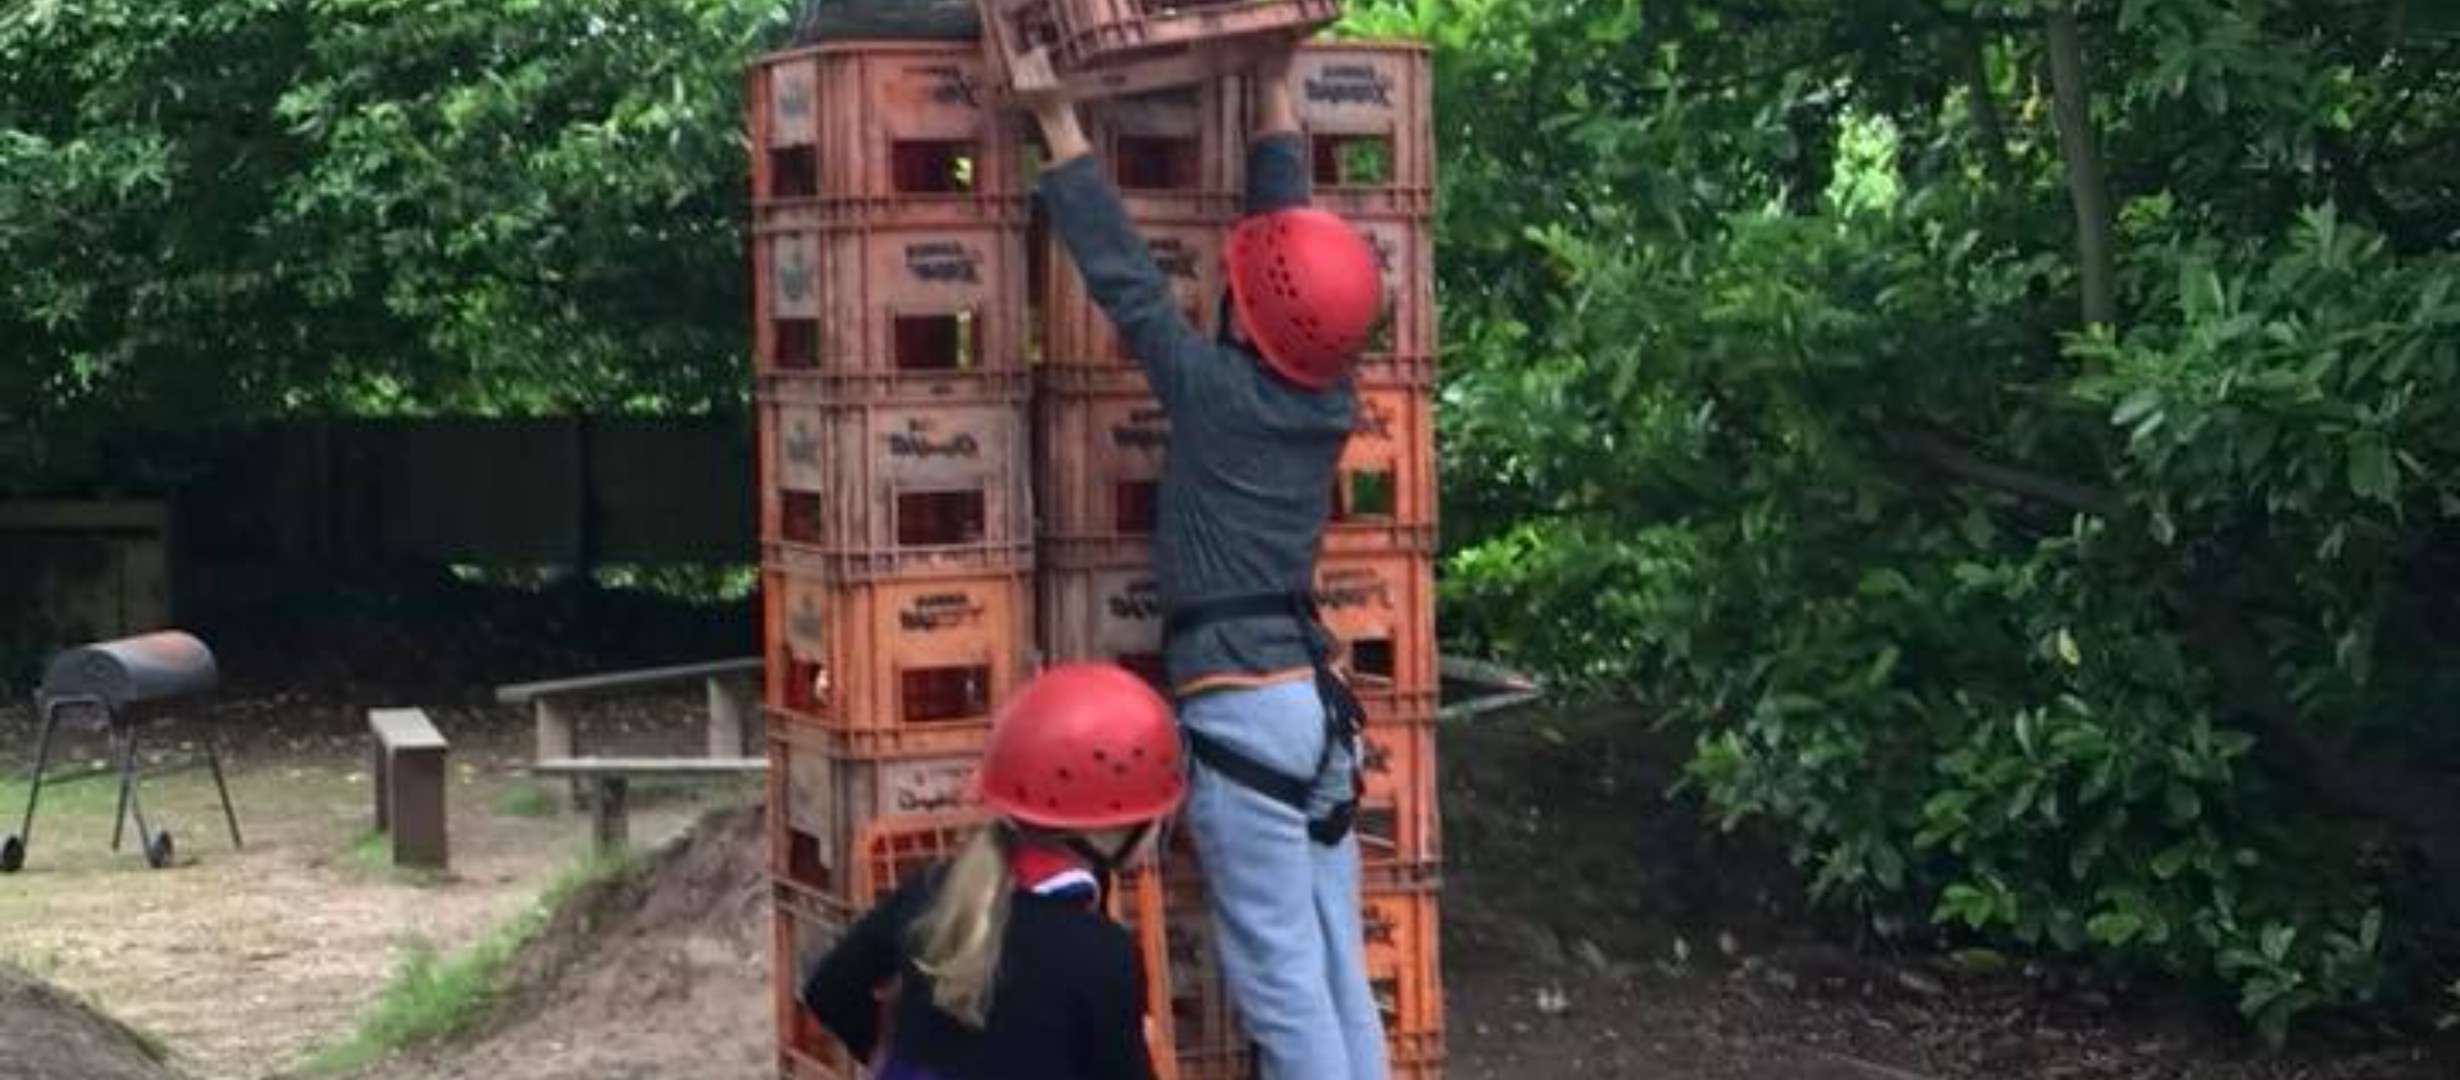 Two children wearing a harness and helmet stood in front of a stack of crates. One is handing a crate up in the air towards the top of the stack.